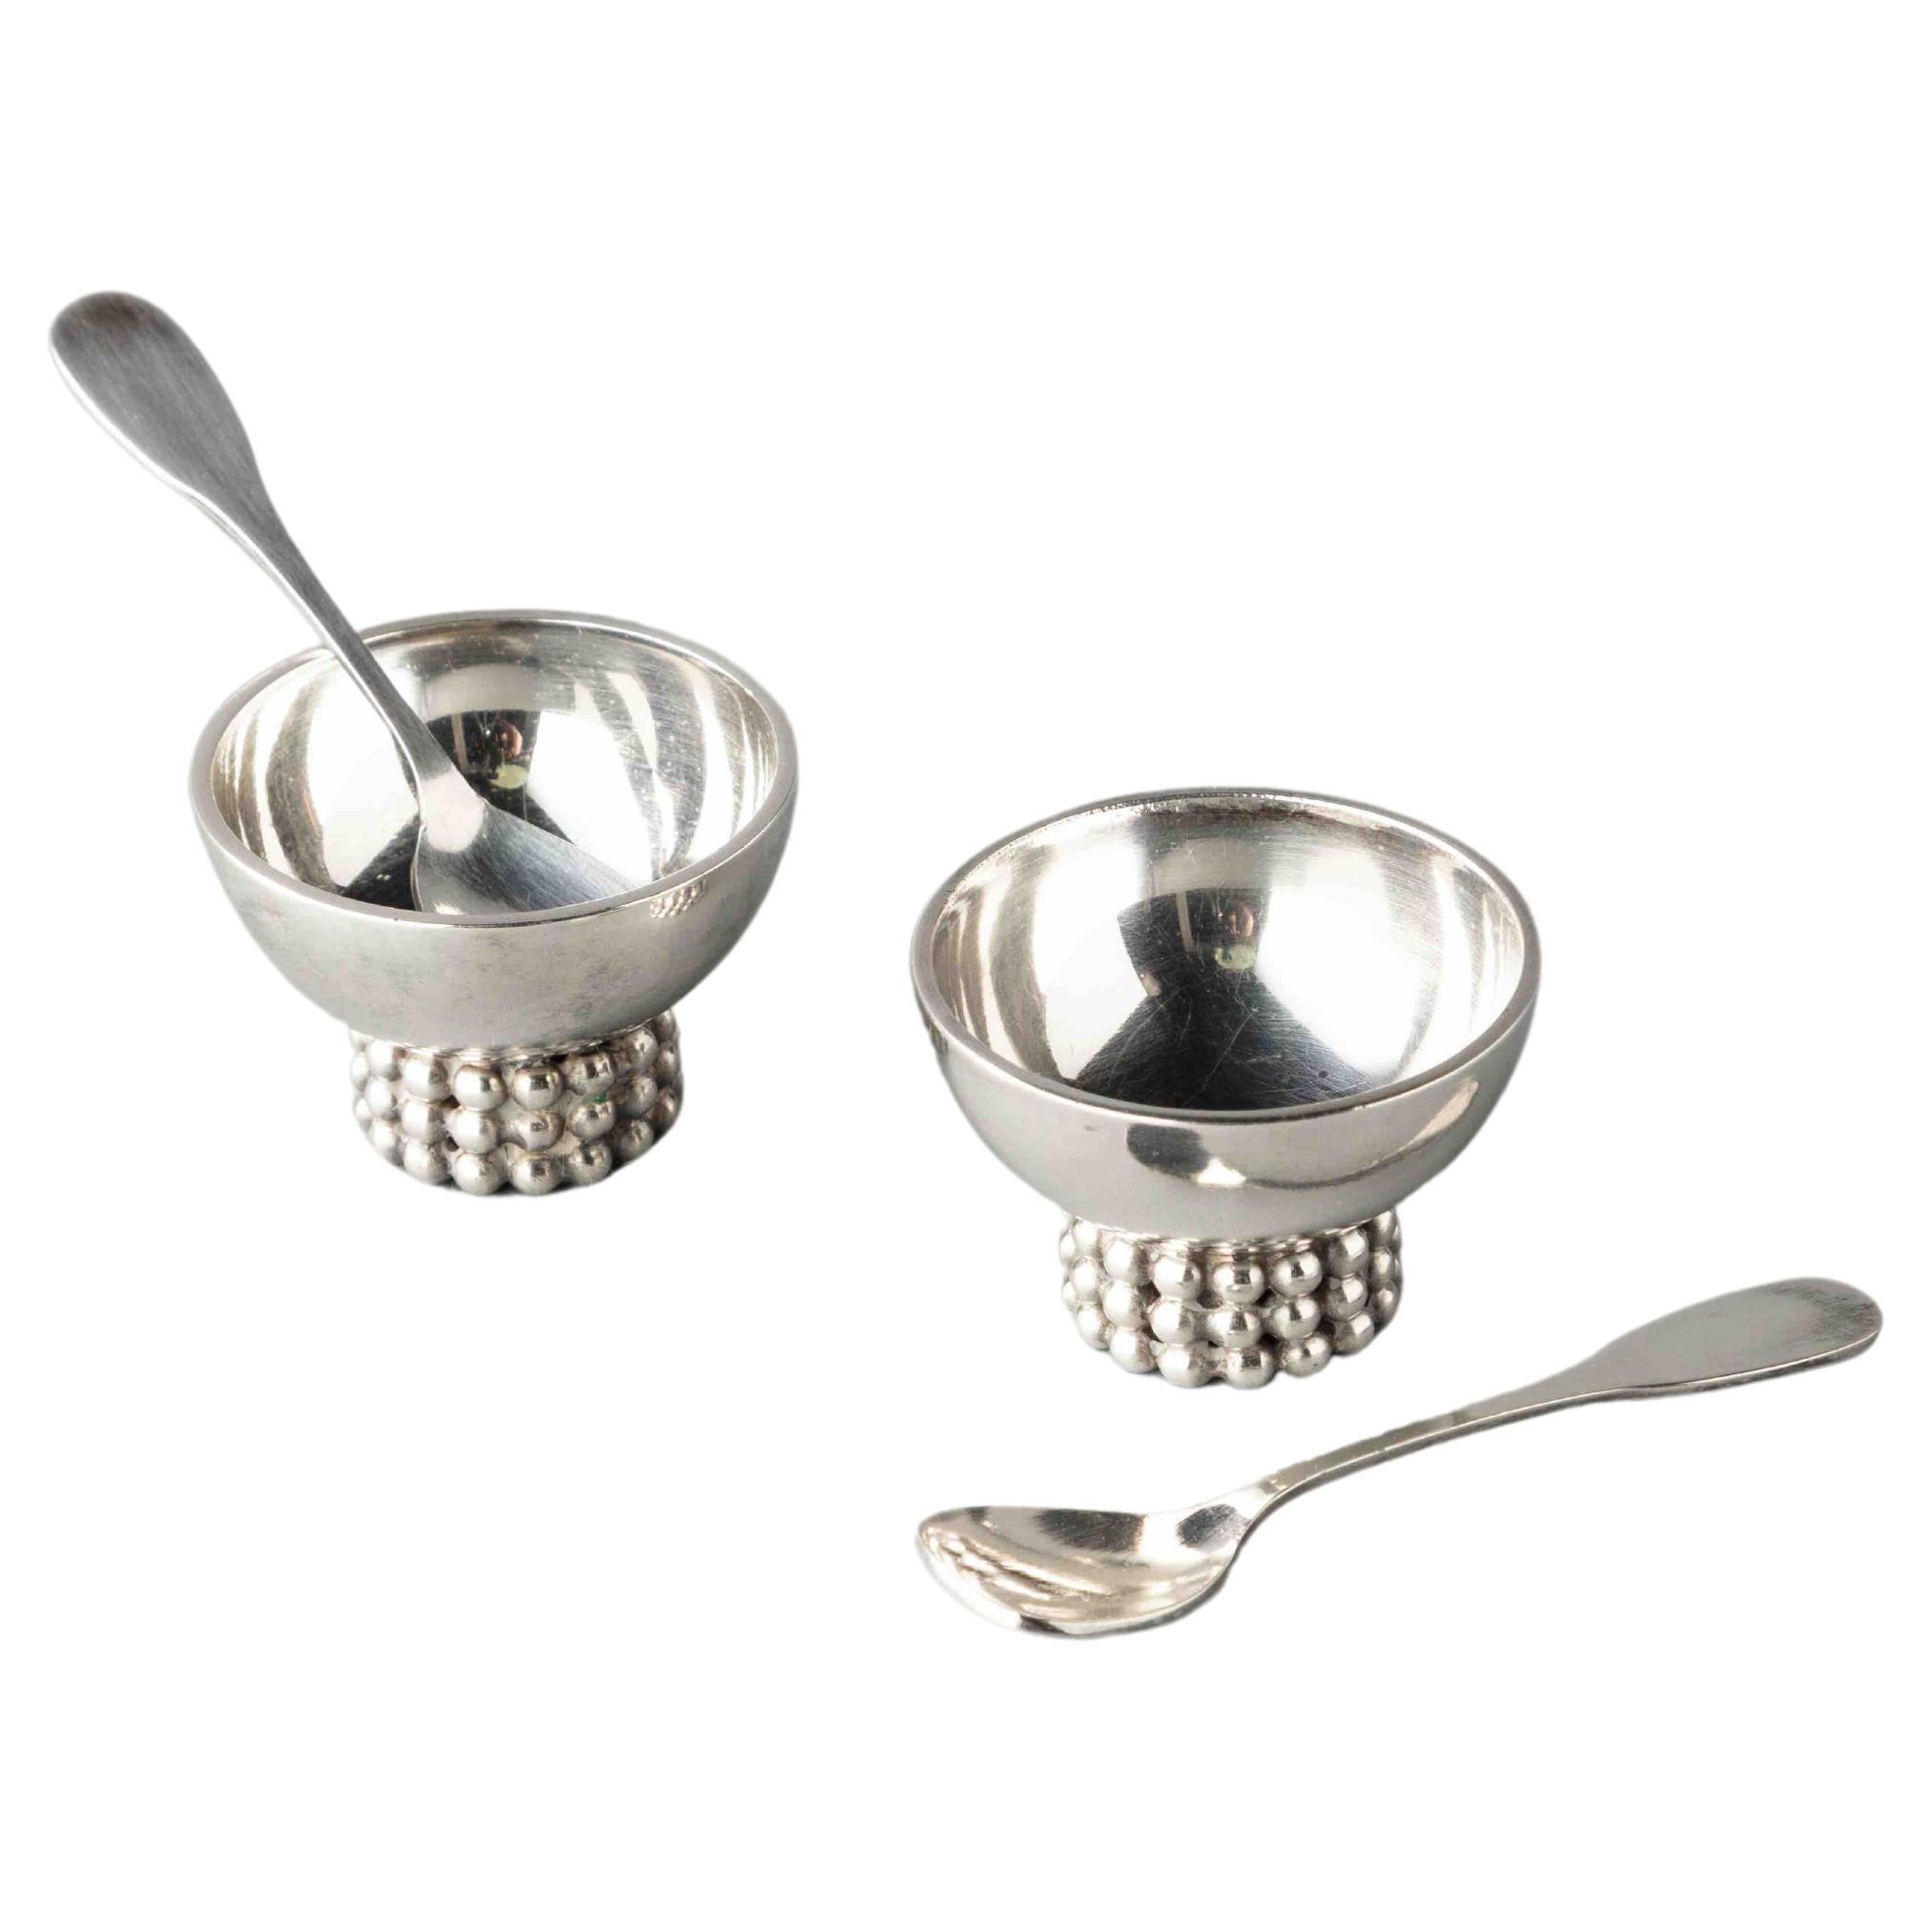 Salt and Pepper Pots with Spoons